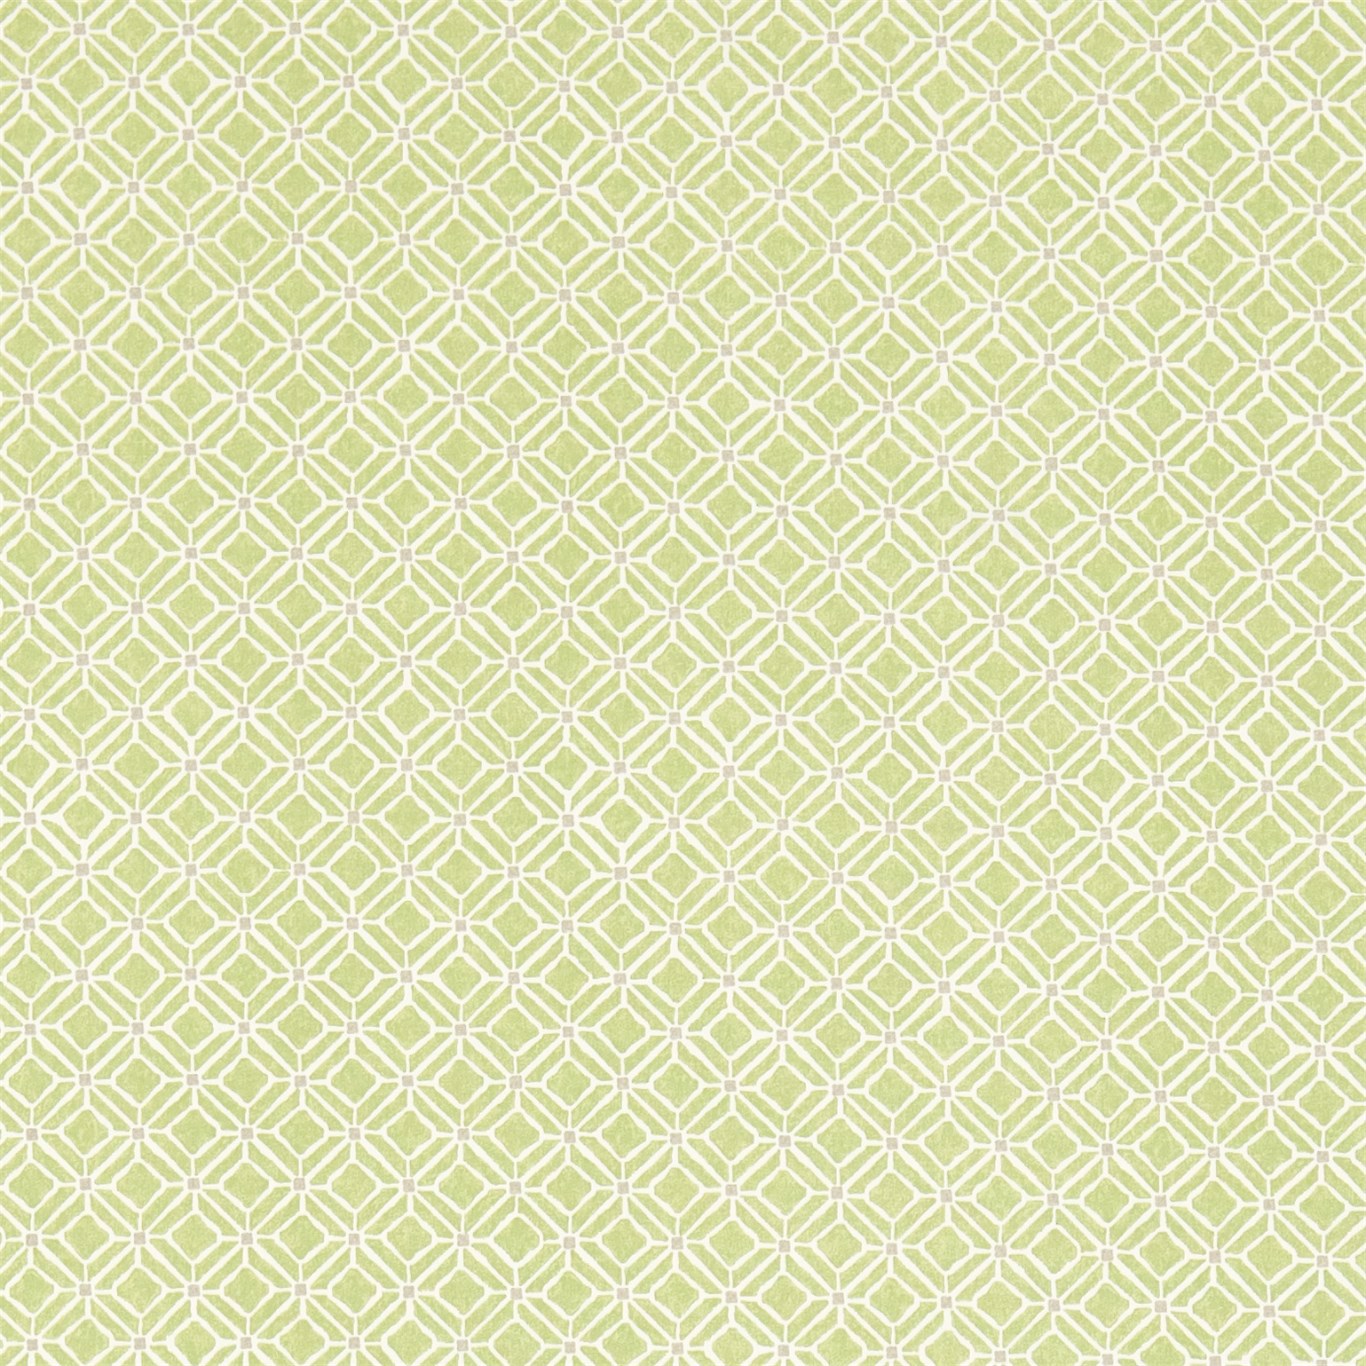 Fretwork Apple/Taupe Fabric by SAN